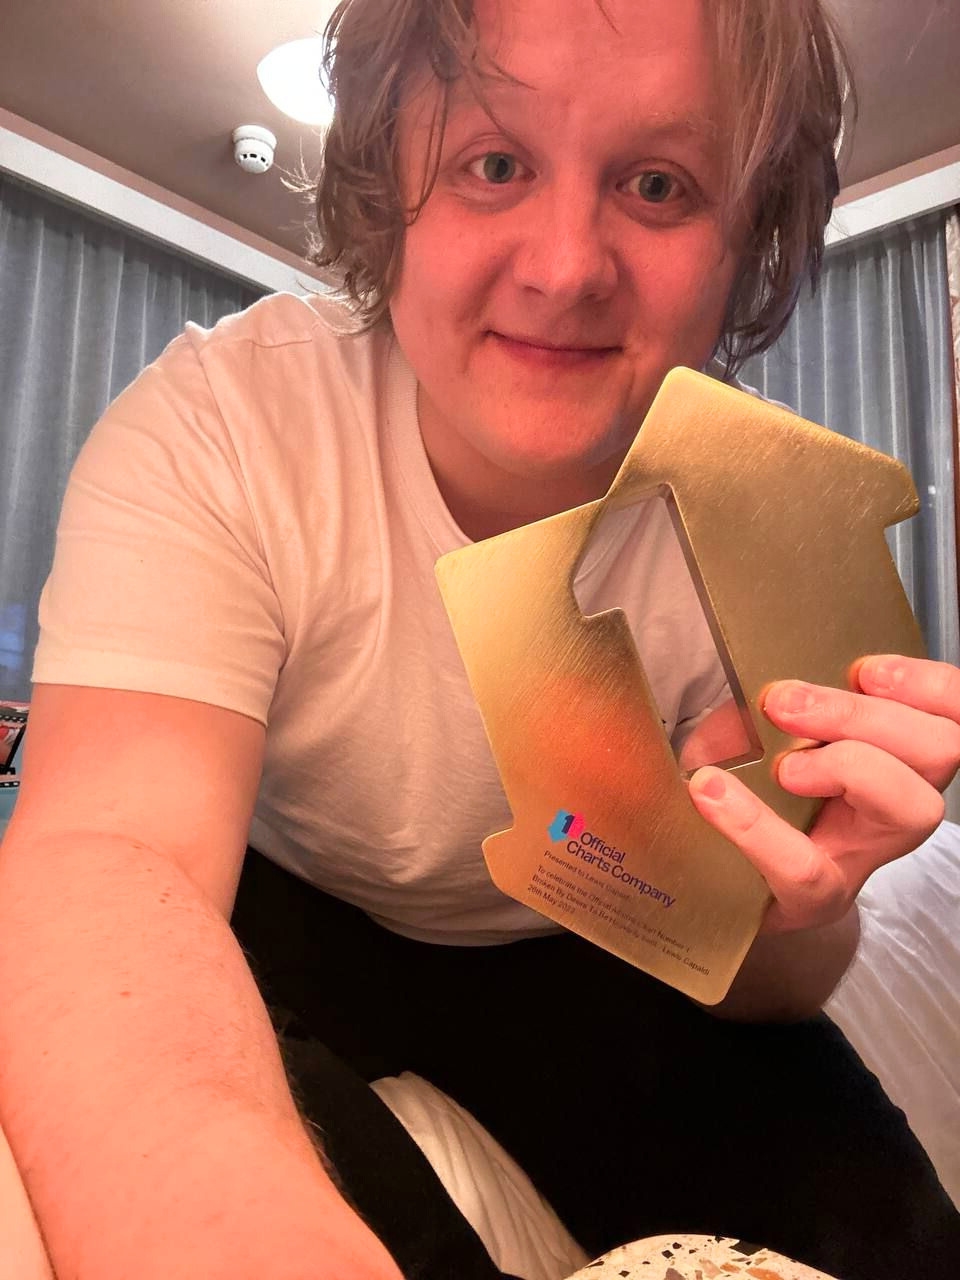 Lewis Capaldi's album has gone to number one on the charts